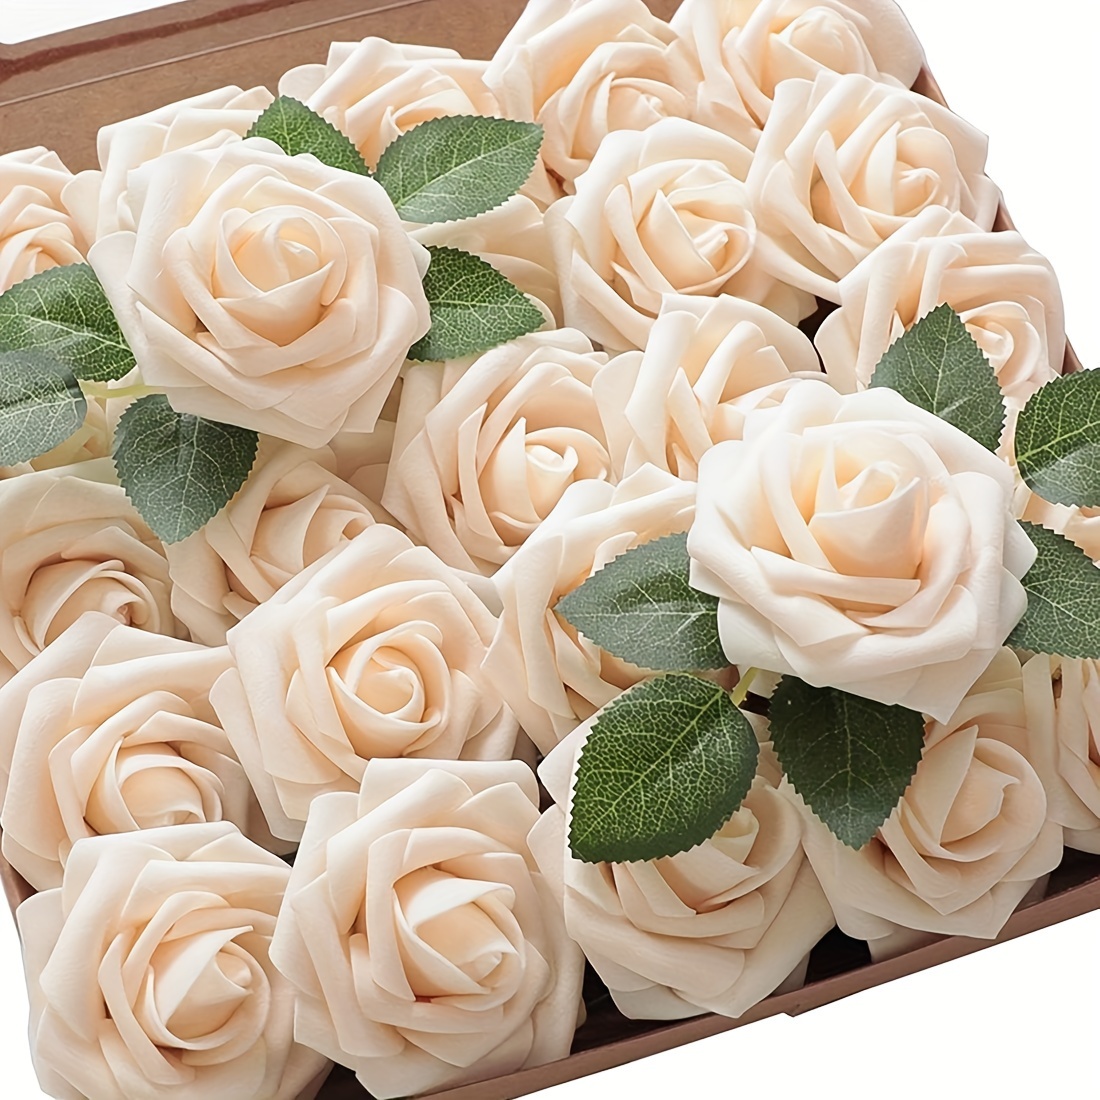 

25pcs Creamy Artificial Rose Flower Arrangement Home Decor, Office Decor, Cafe Decor, Valentine's Day Gift, Birthday Gift, Mother's Day Gift, Outdoor Wedding Diy Party Centerpieces And More!